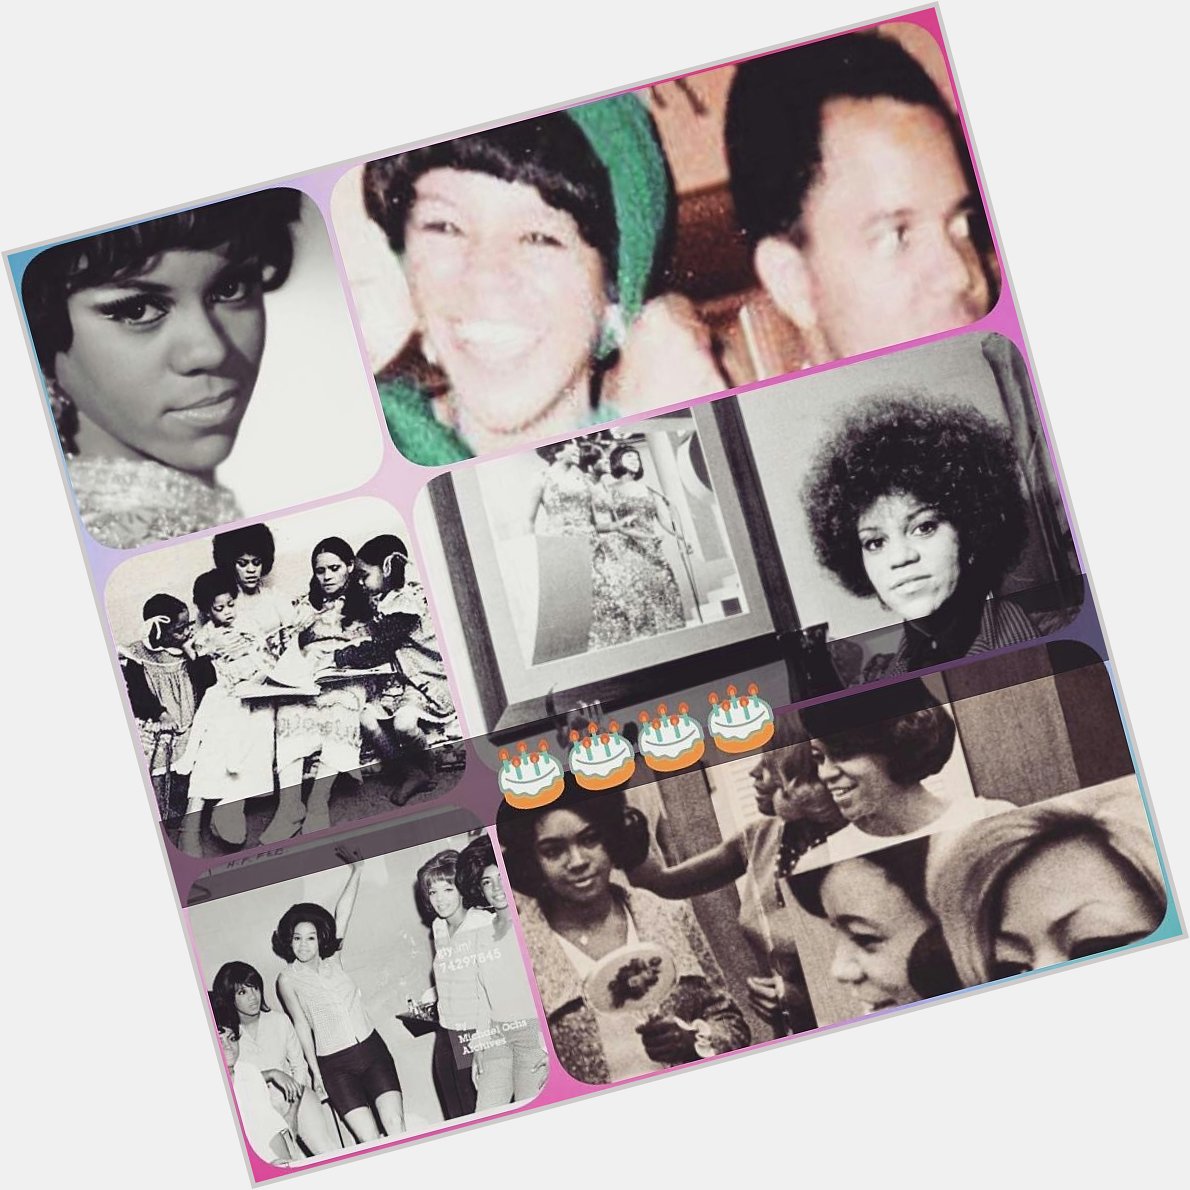 Happy birthday Florence Ballard is her kids still trying to do the movie about her 